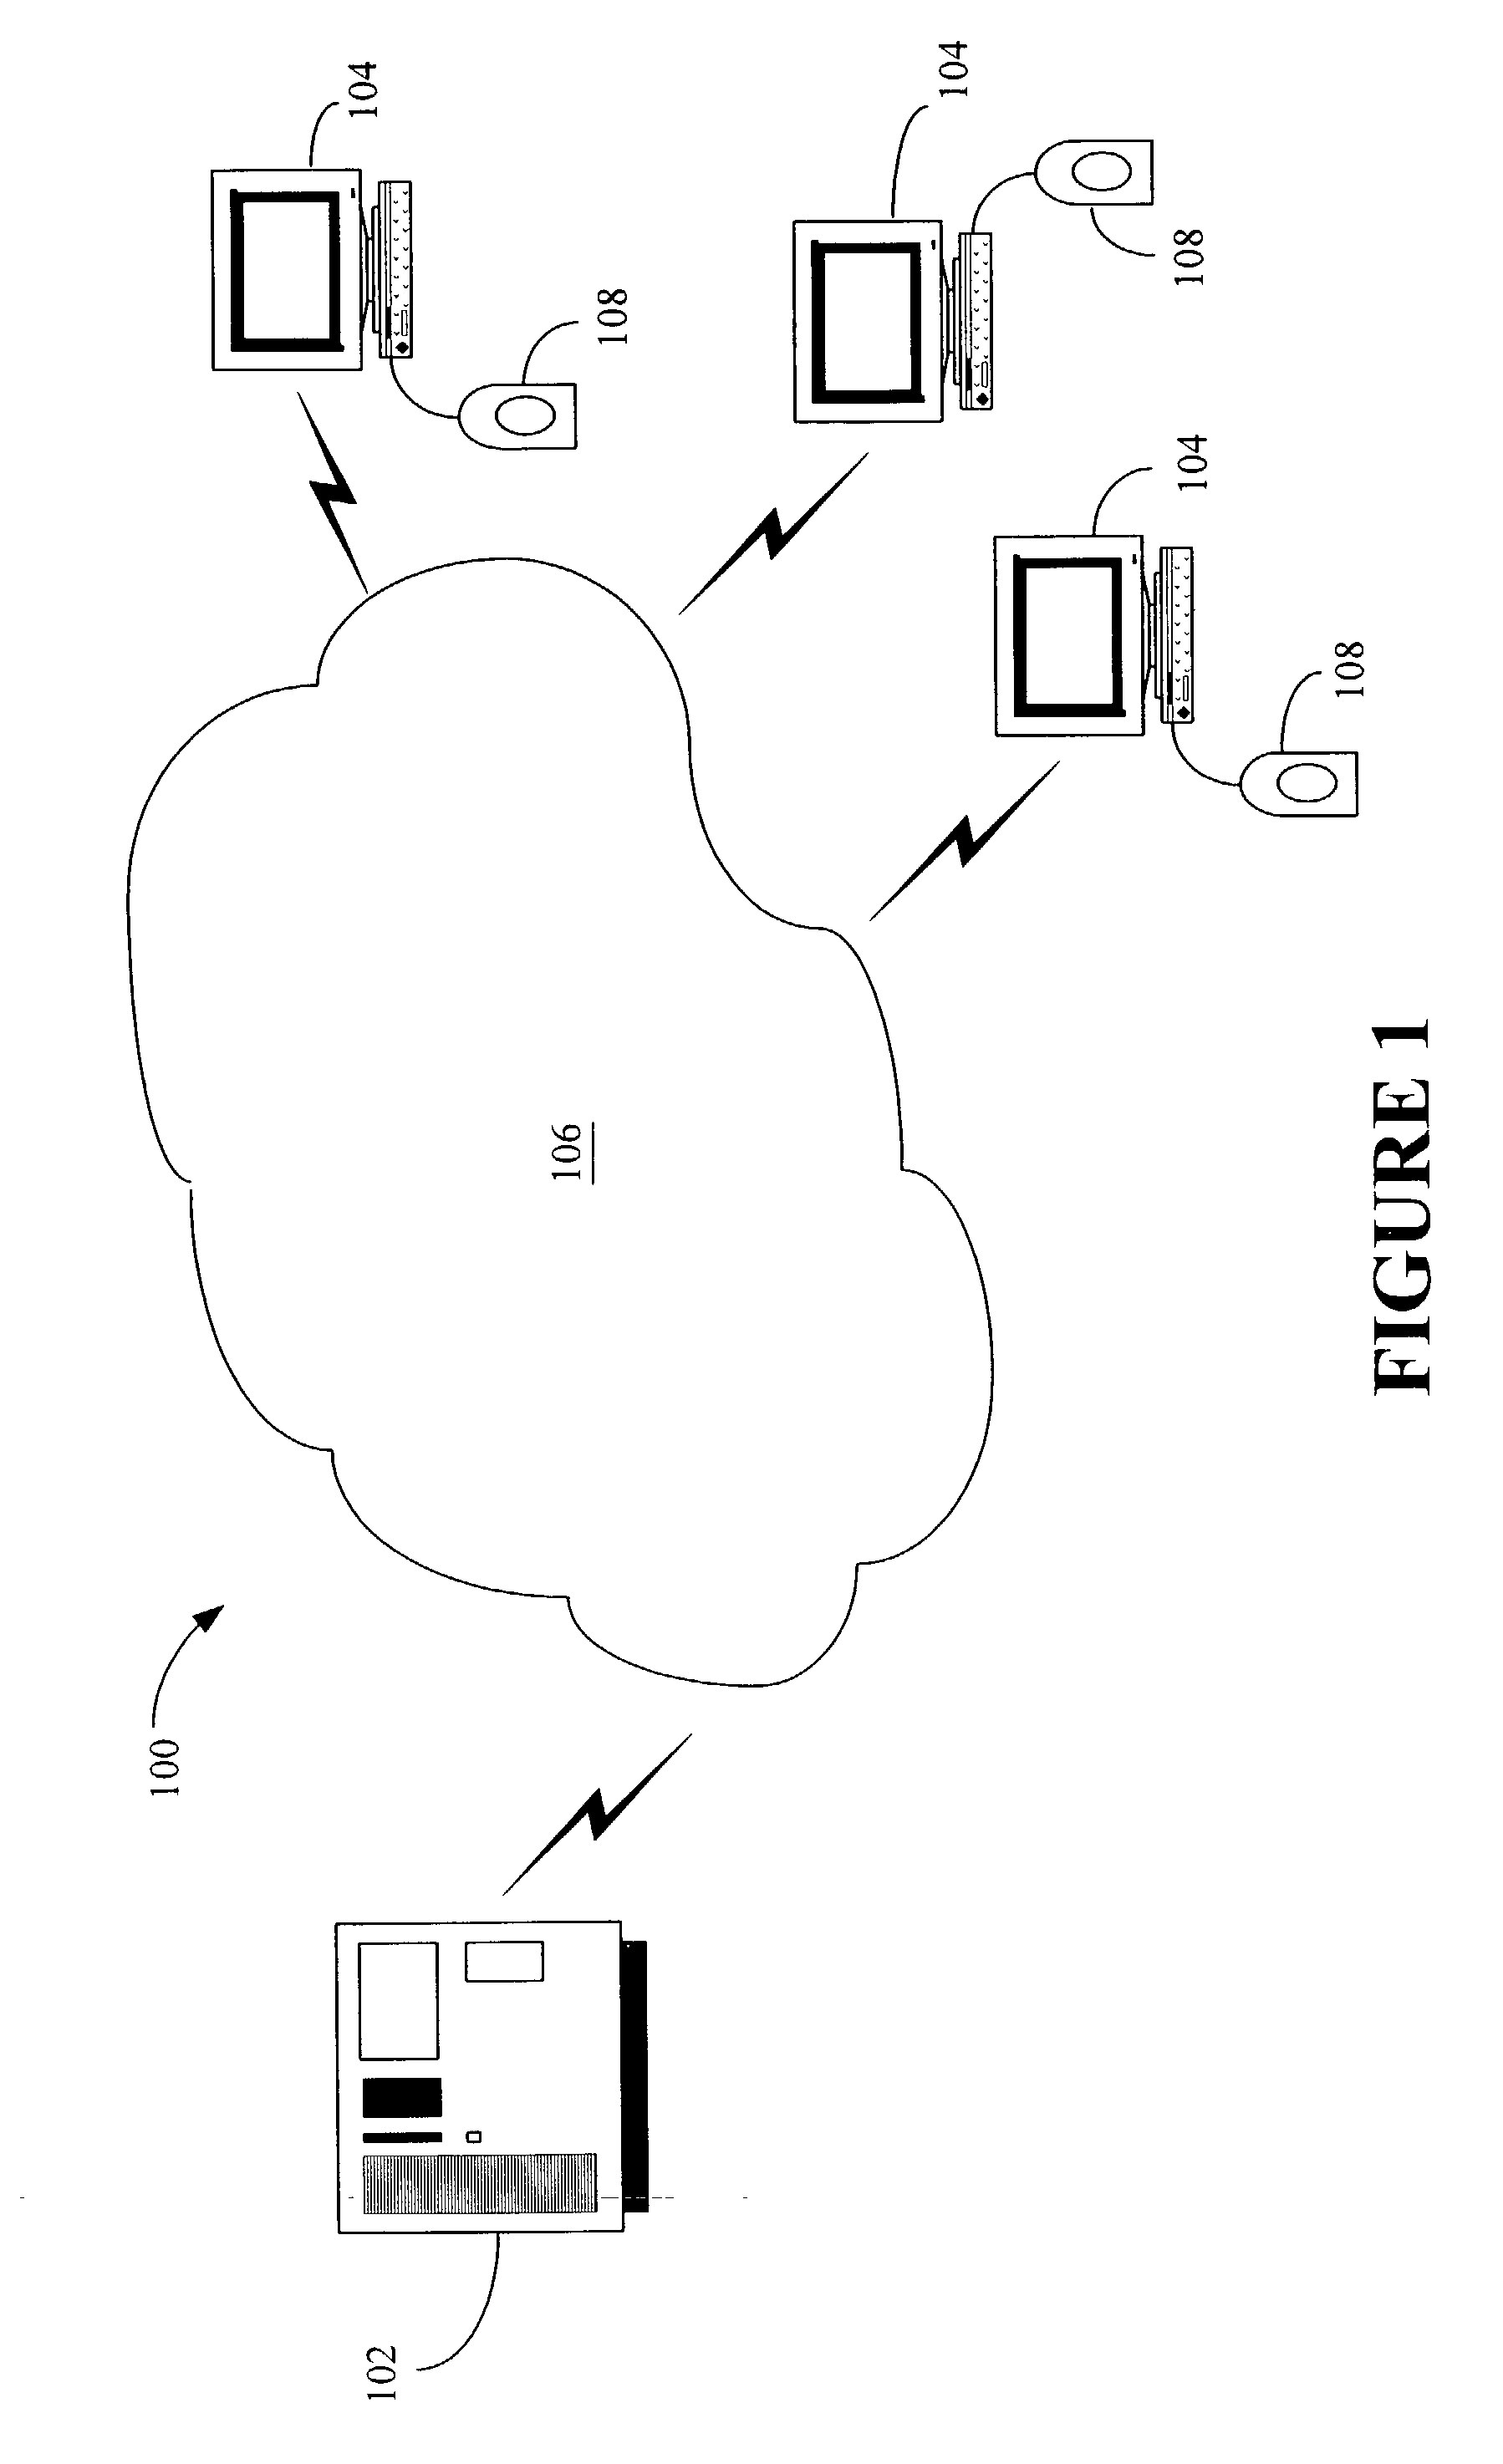 Method and apparatus for providing biometric information as a signature to a contract